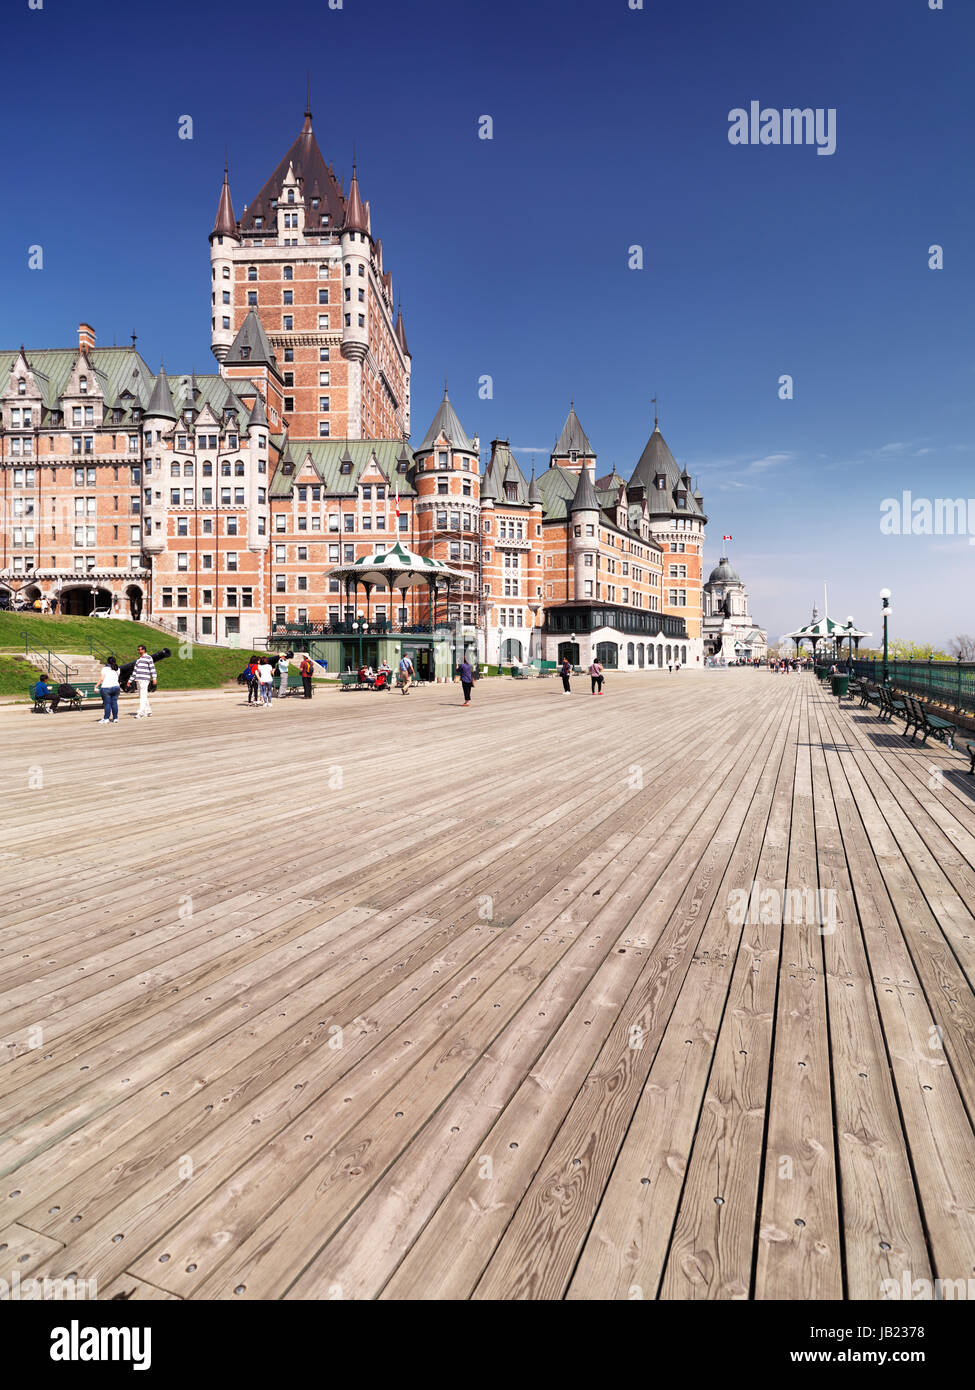 License available at MaximImages.com Fairmont Le Chateau Frontenac castle luxury grand hotel Old Quebec city, Canada Stock Photo